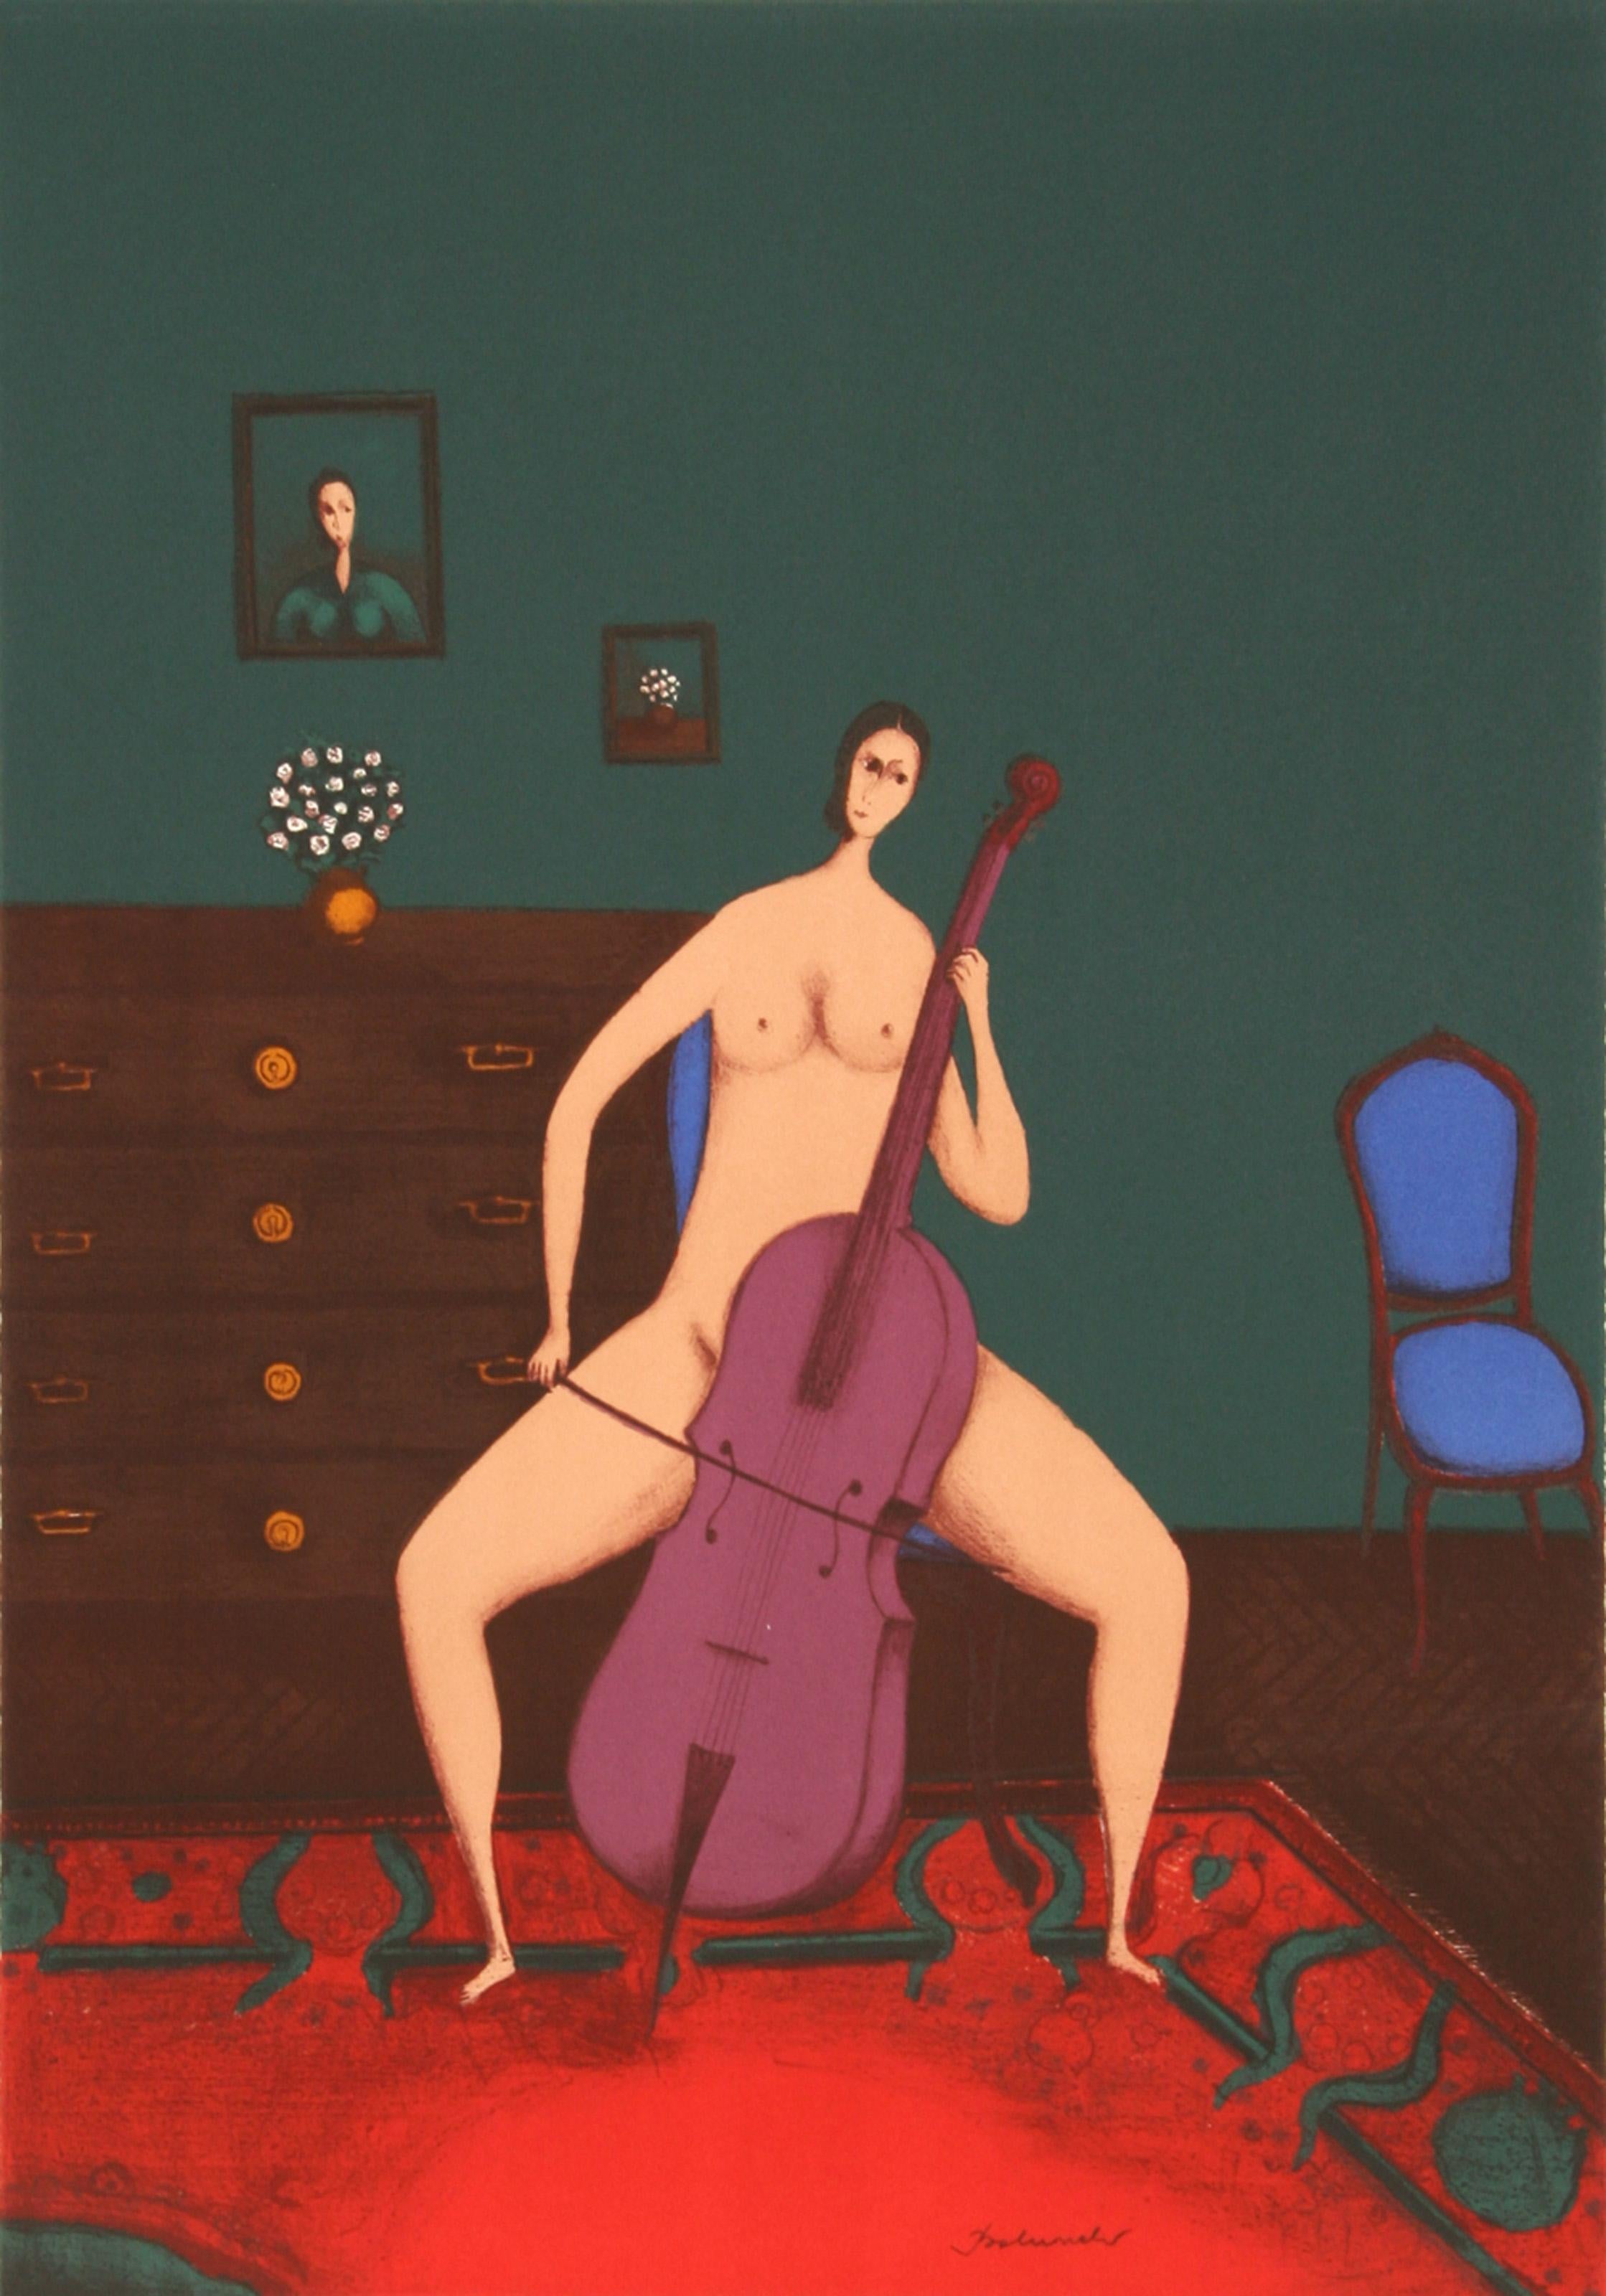 Branko Bahunek, Croatian (1935 - ) -  The Cellist. Medium: Lithograph, Signed in Pencil, Edition: 175, Size: 28.5 in. x 21 in. (72.39 cm x 53.34 cm) 